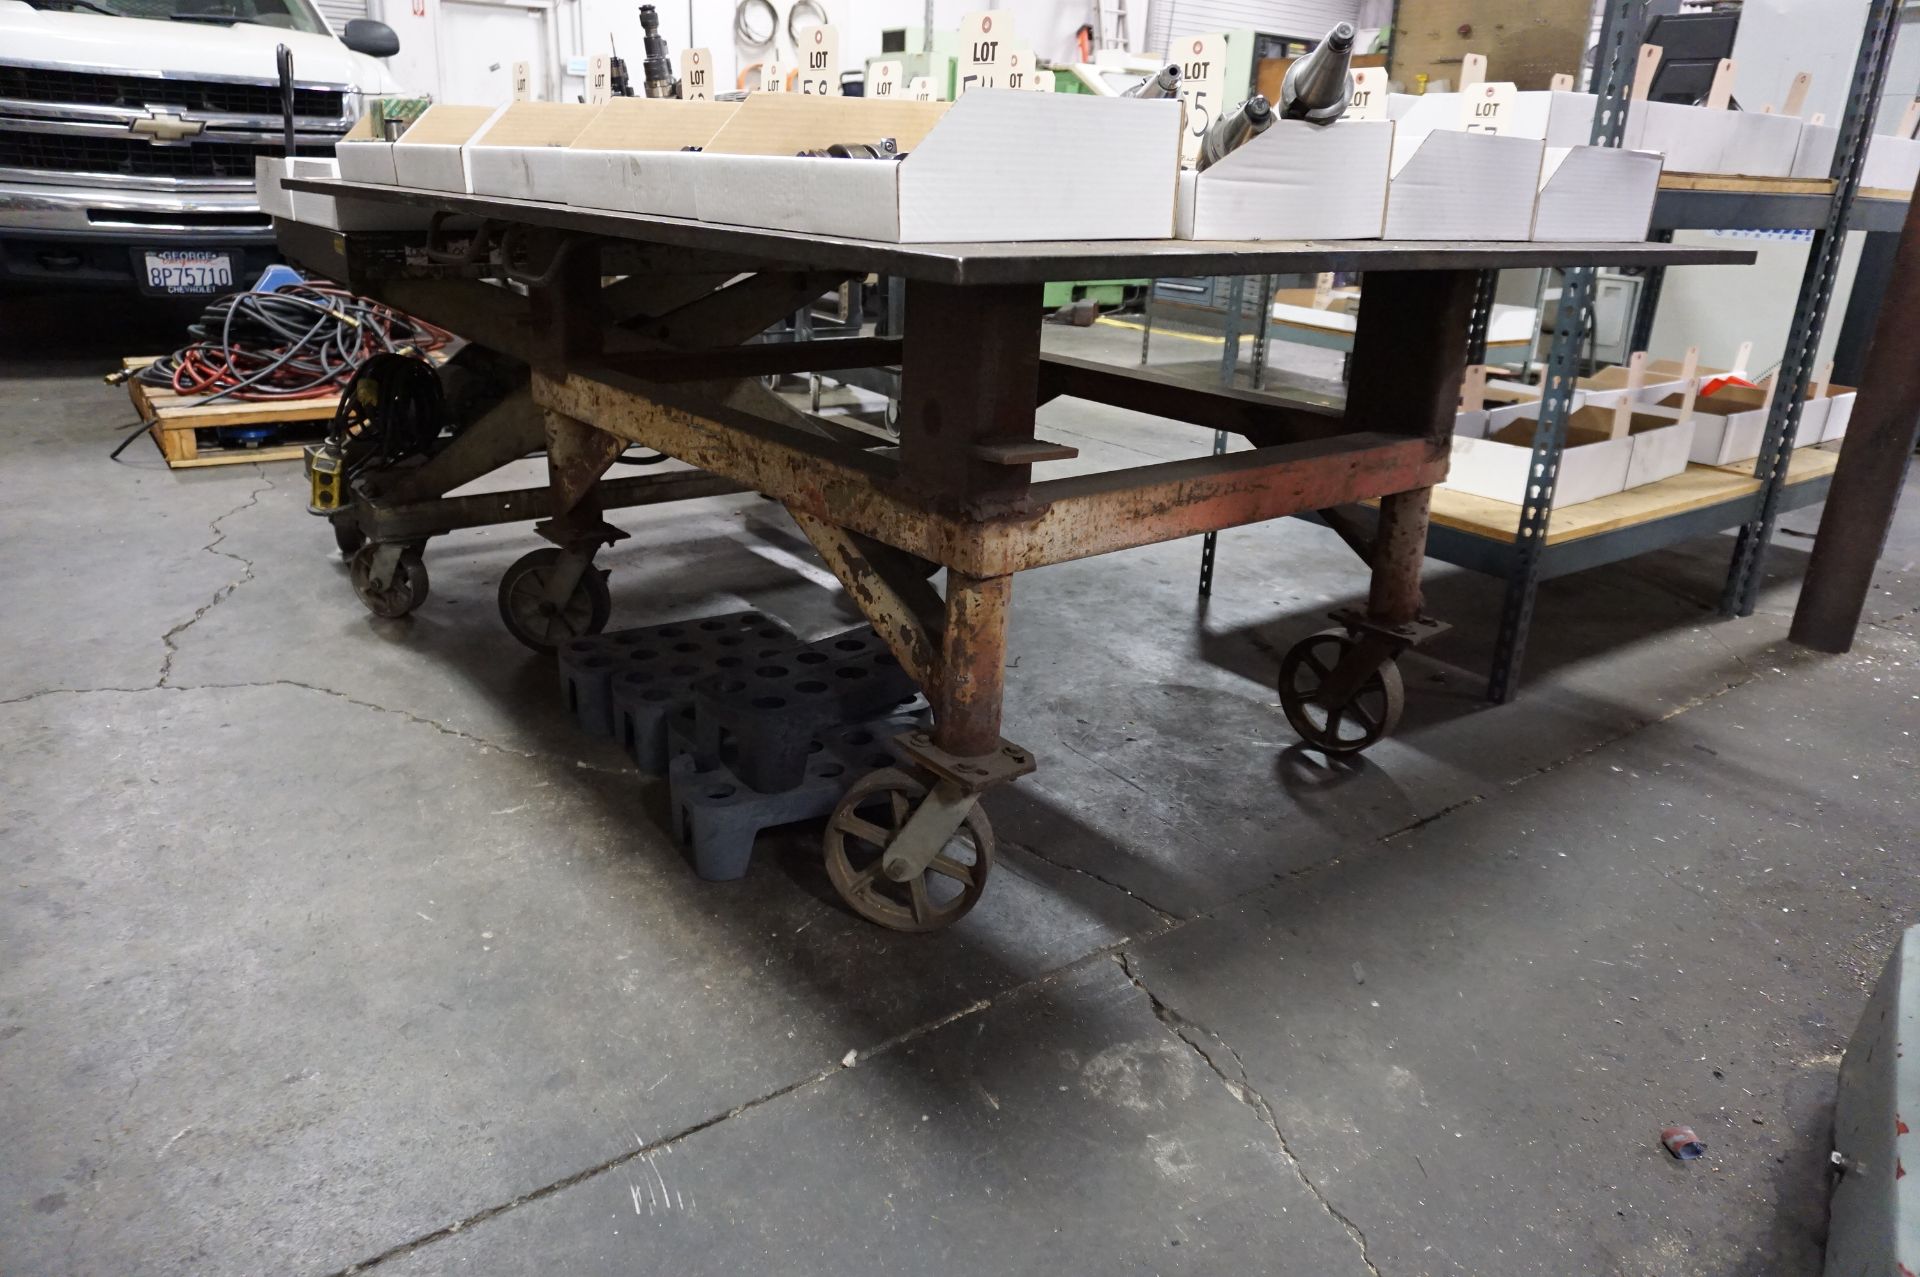 LOT TO INCLUDE: (1) 4000 LB CAP HYDRAULIC LIFT MODEL L9436, S/N 50250A, (1) STEEL WORK TABLE, - Image 4 of 6